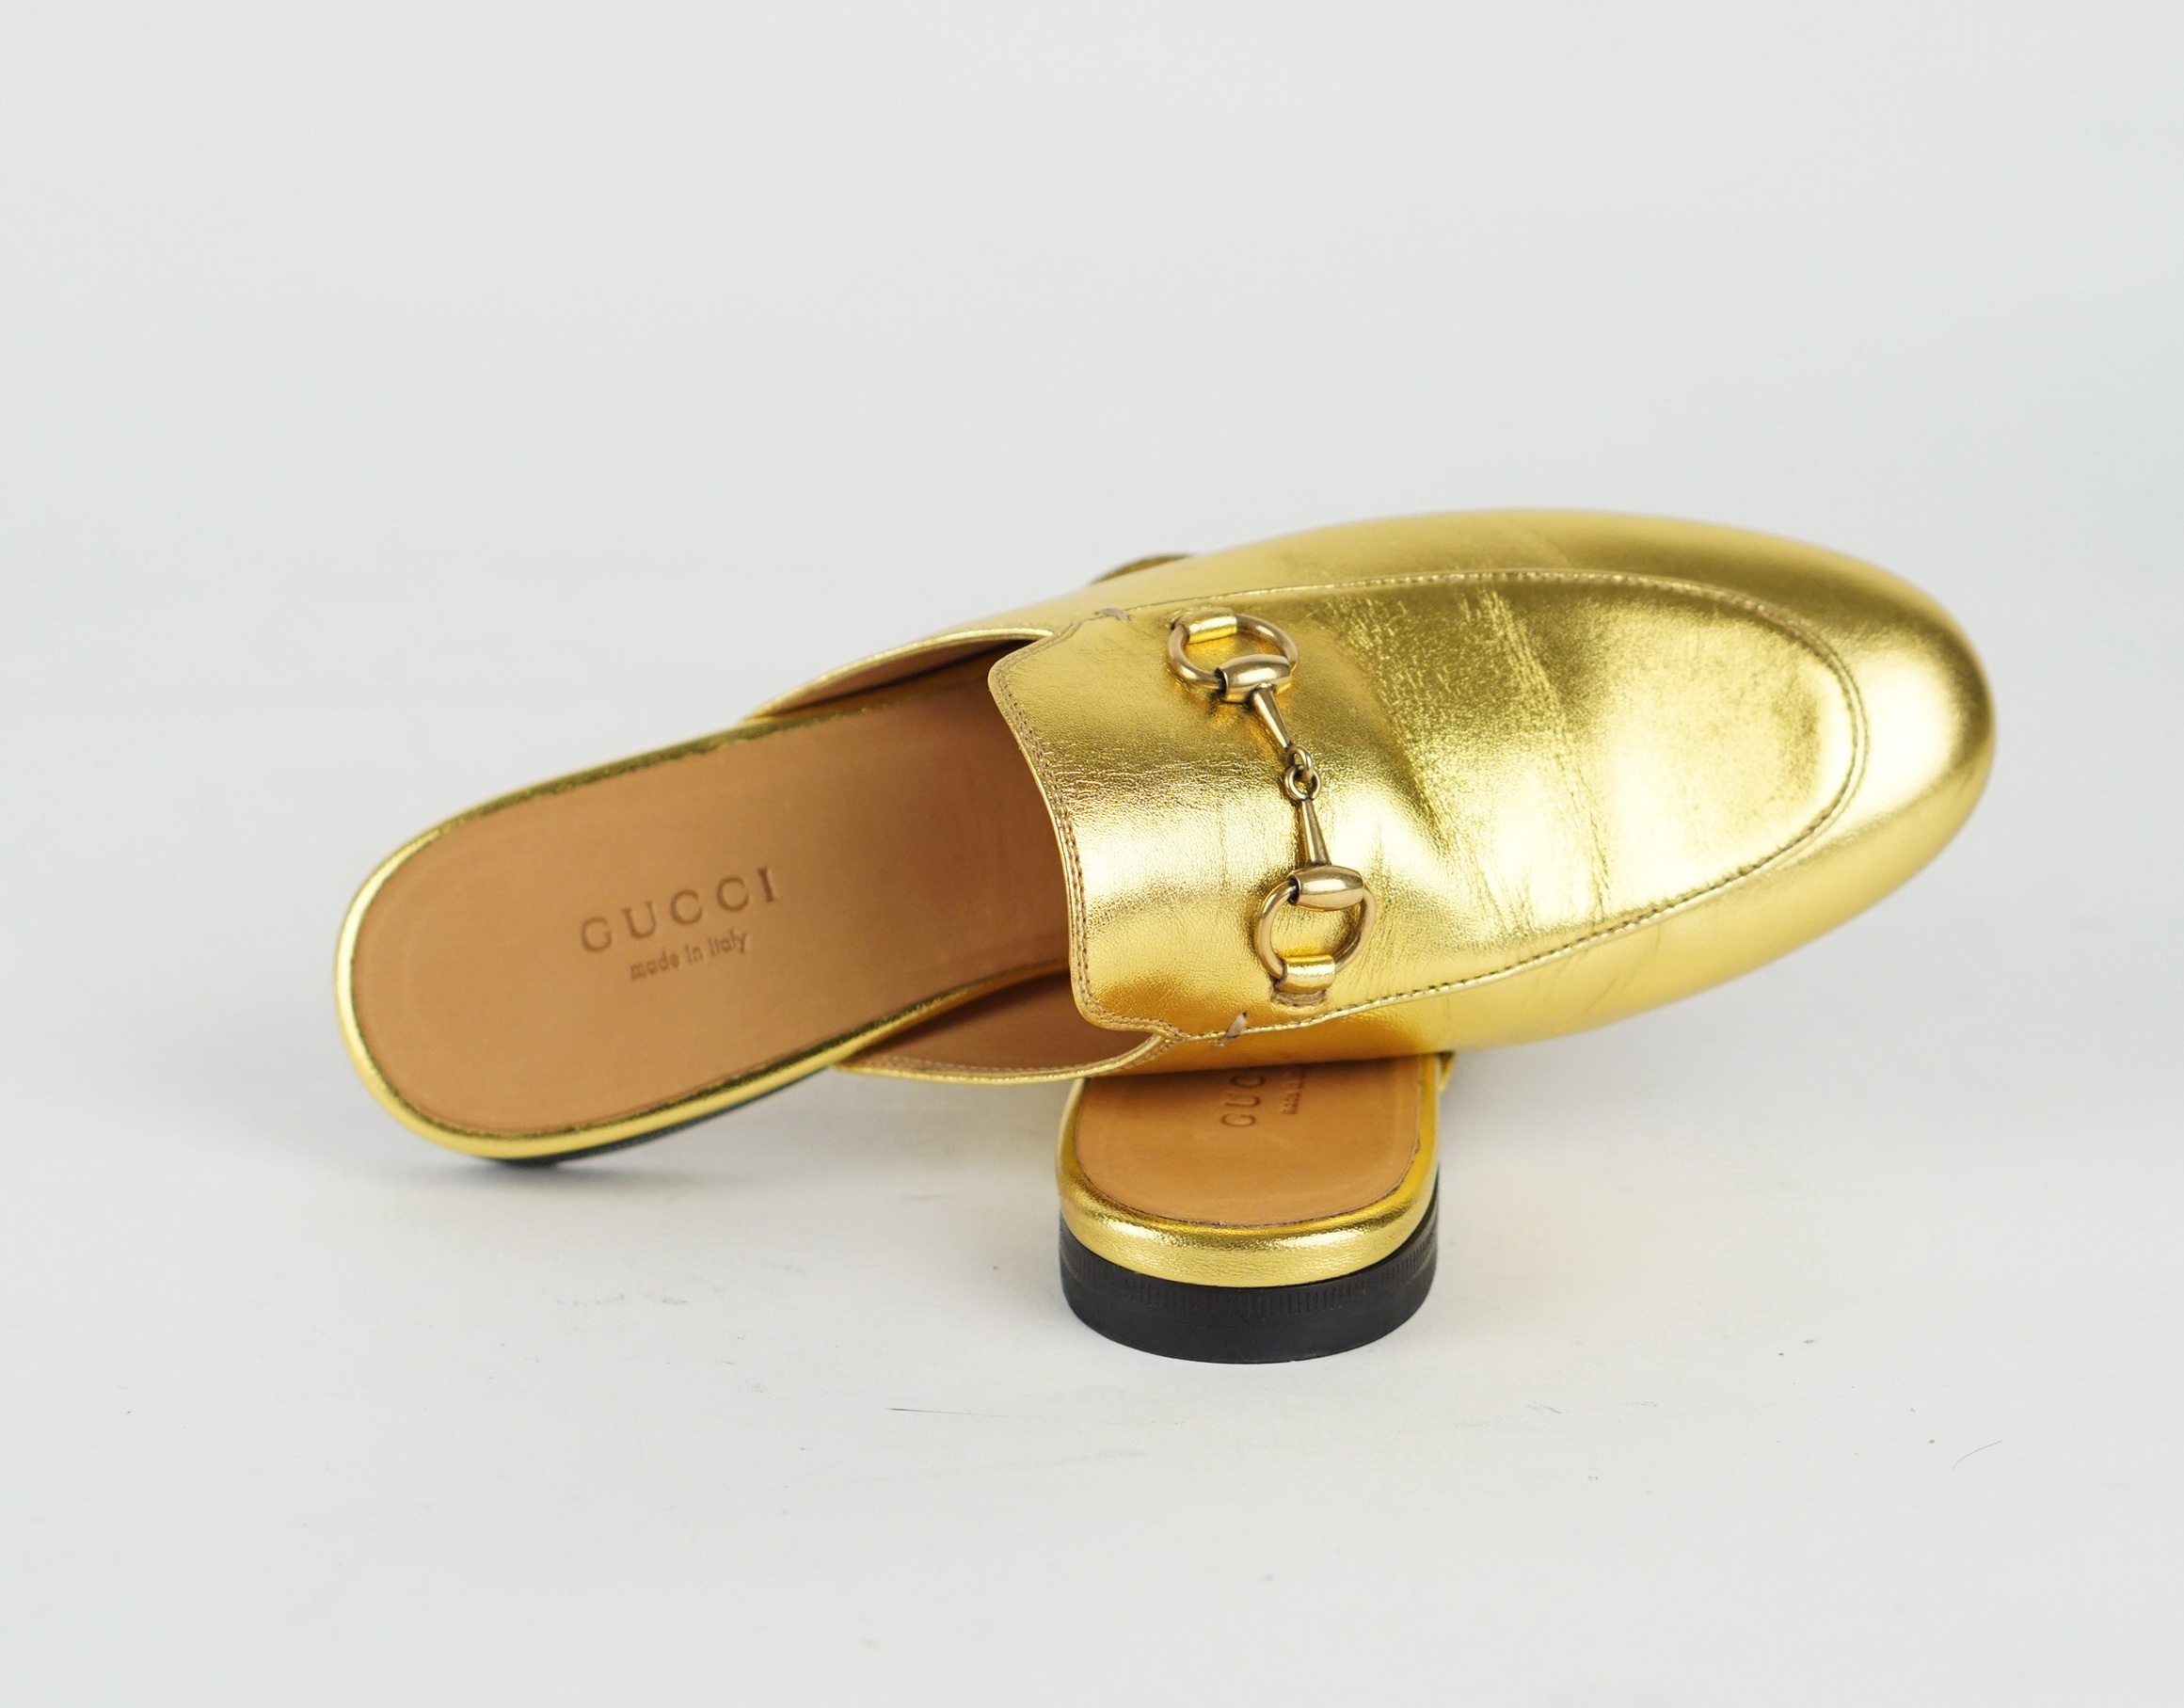 Gold Leather Princetown Mule Flats 